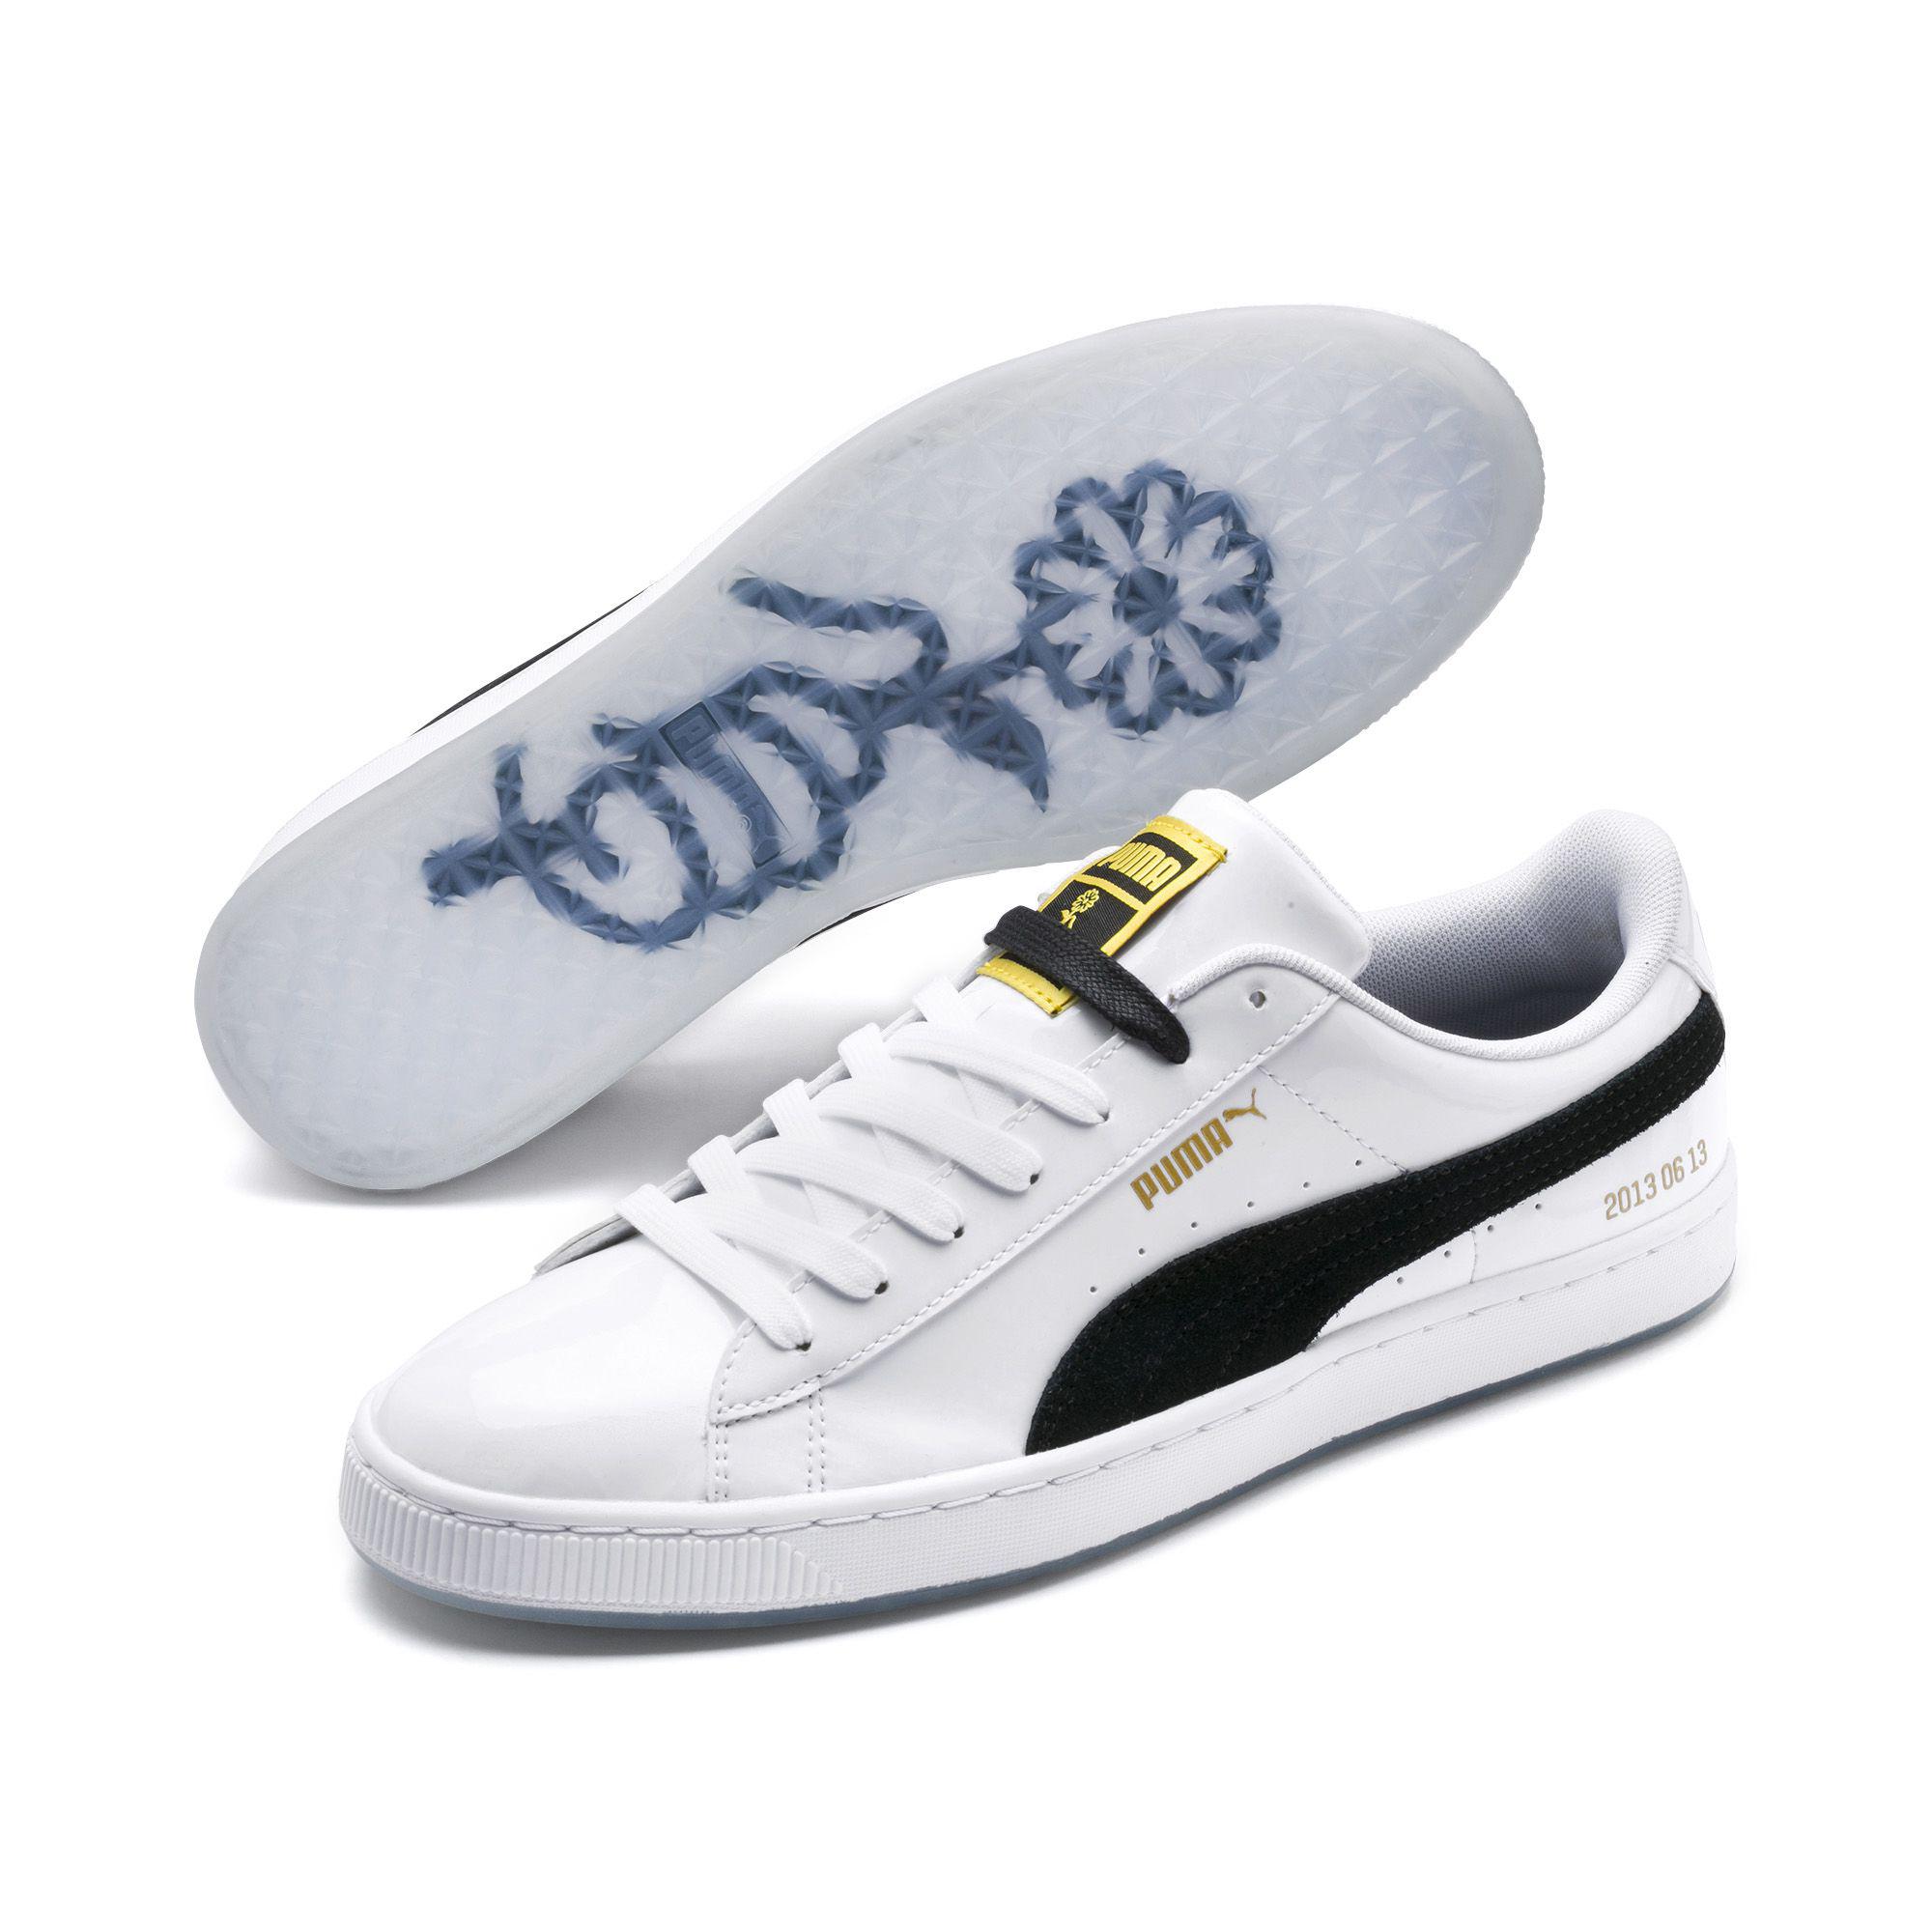 PUMA Rubber X Bts Basket Patent Sneakers in White for Men - Lyst